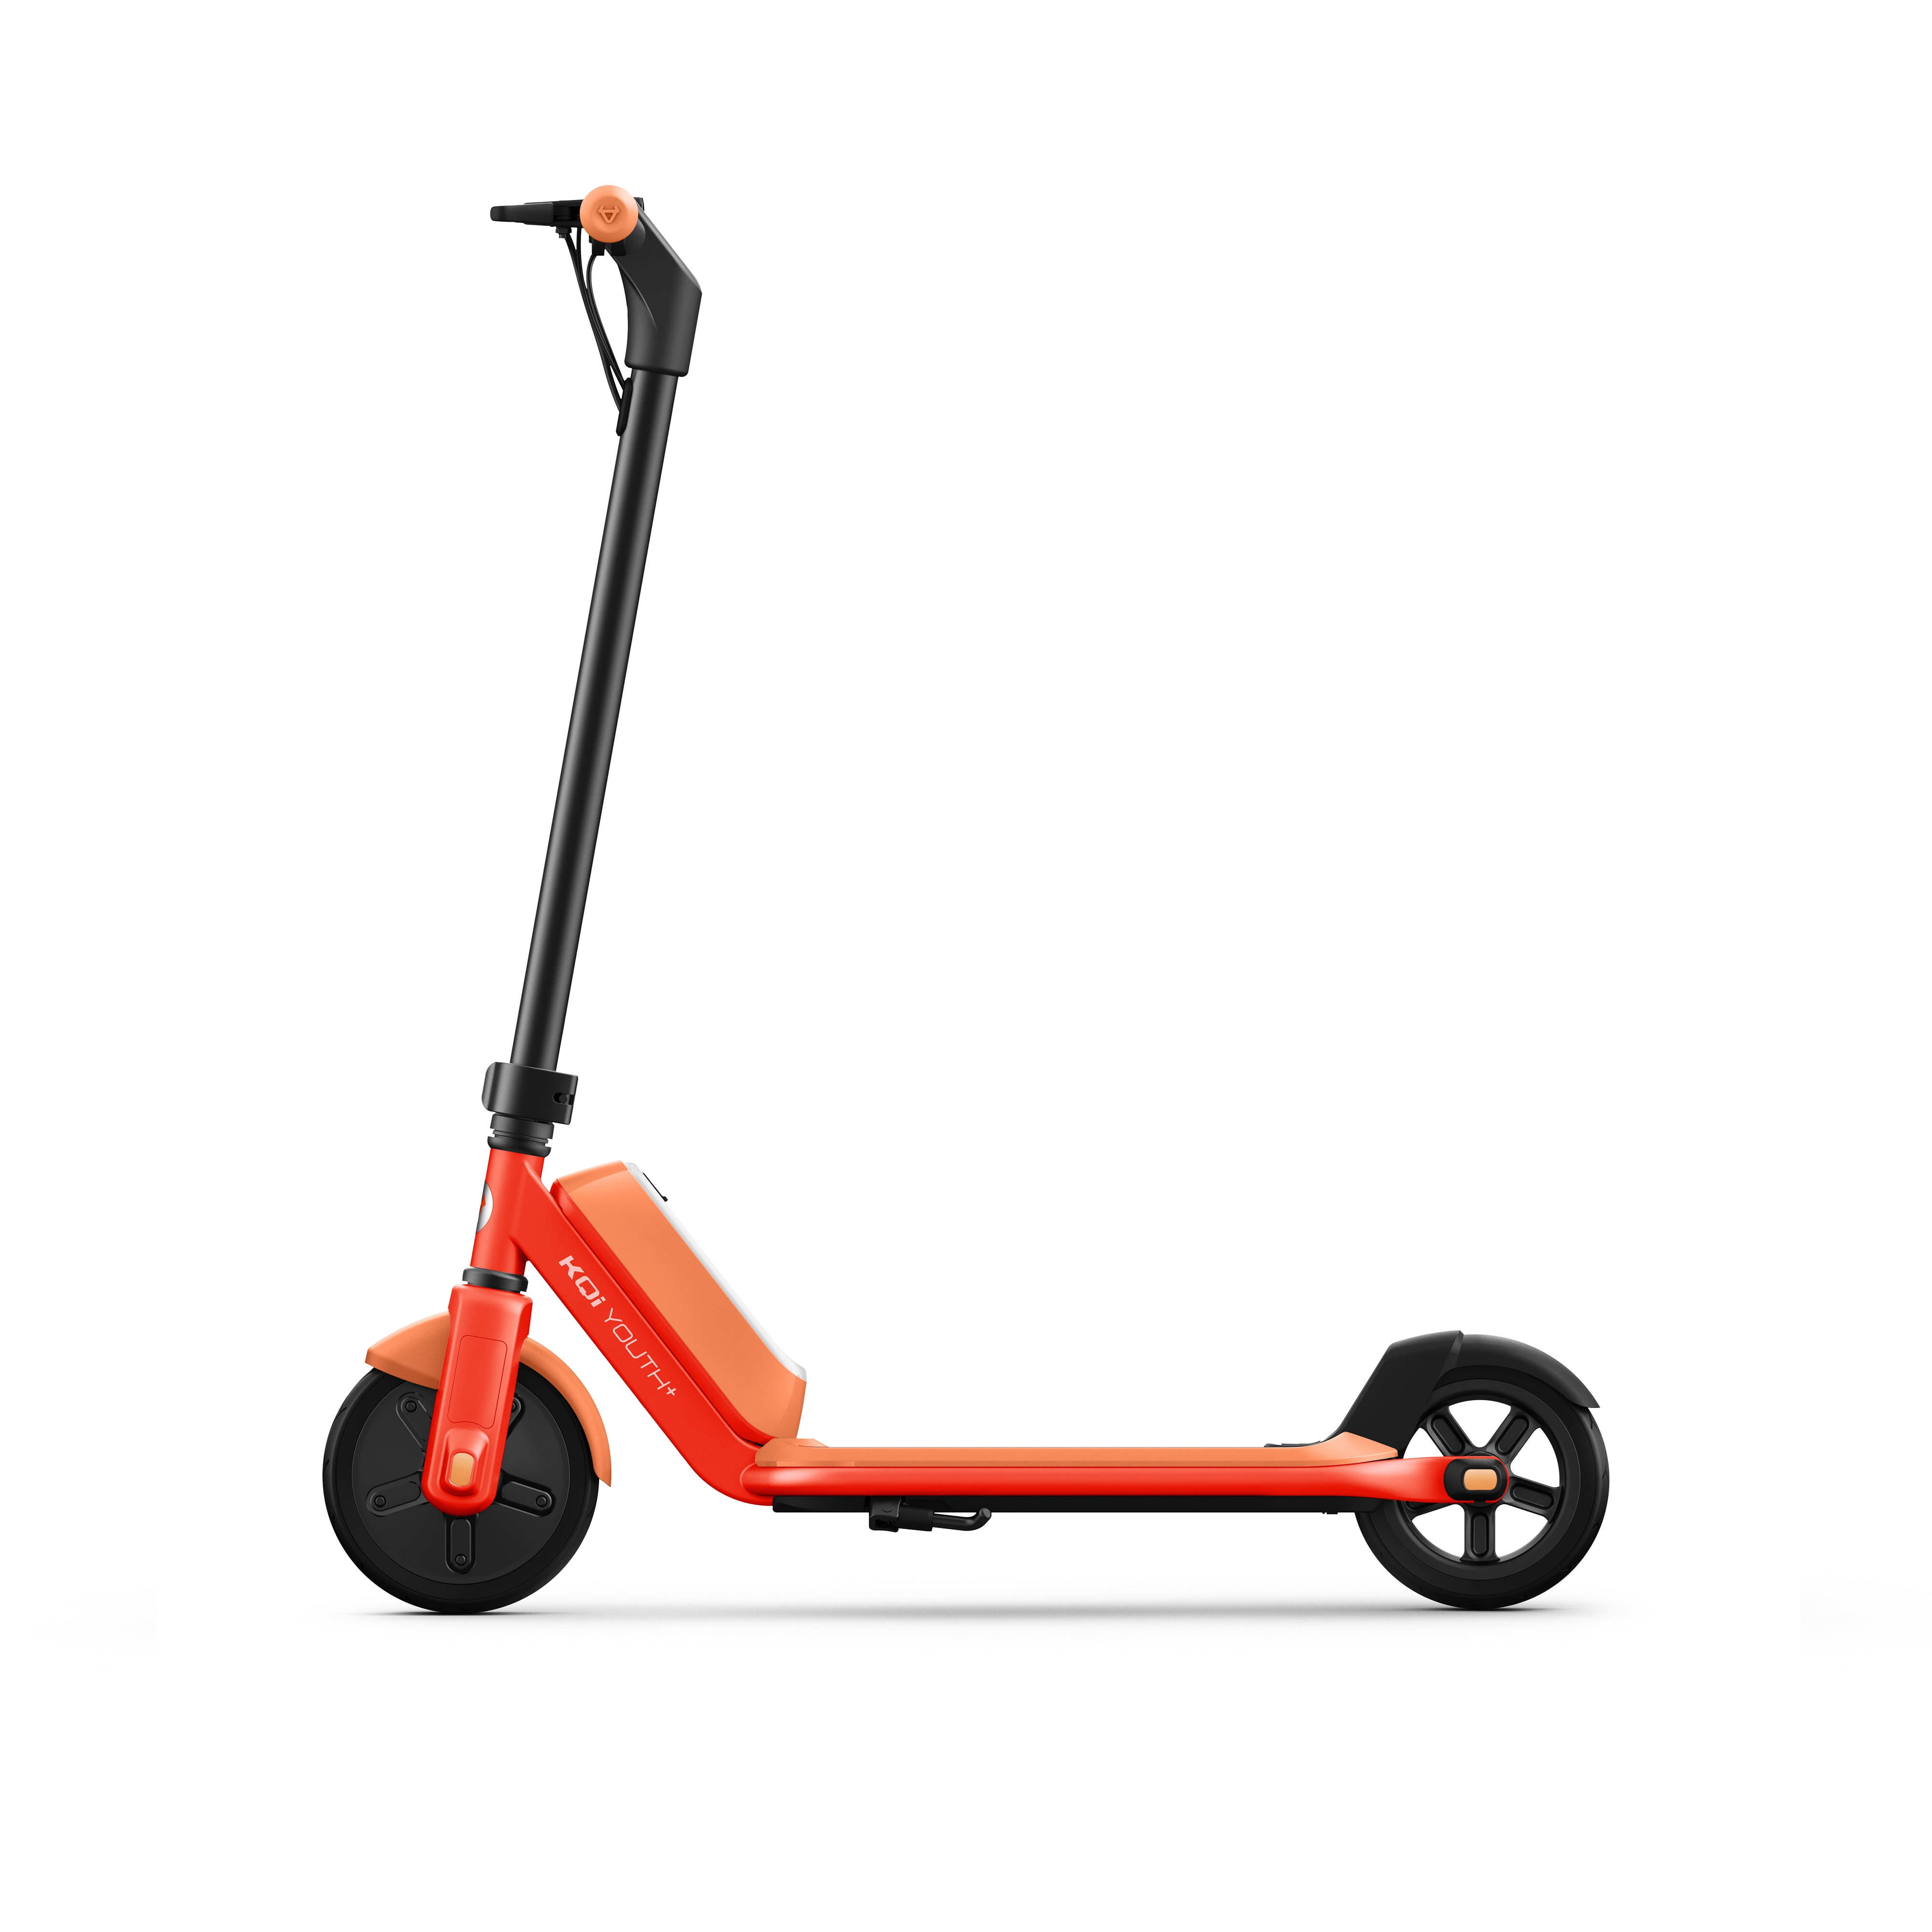 NIU KQi Youth+ Electric Scooter for Kids Ages 8-14 up to 70 Mins Riding Time 9-in-1 Ambient Lights Automotive Grade Steel Frame